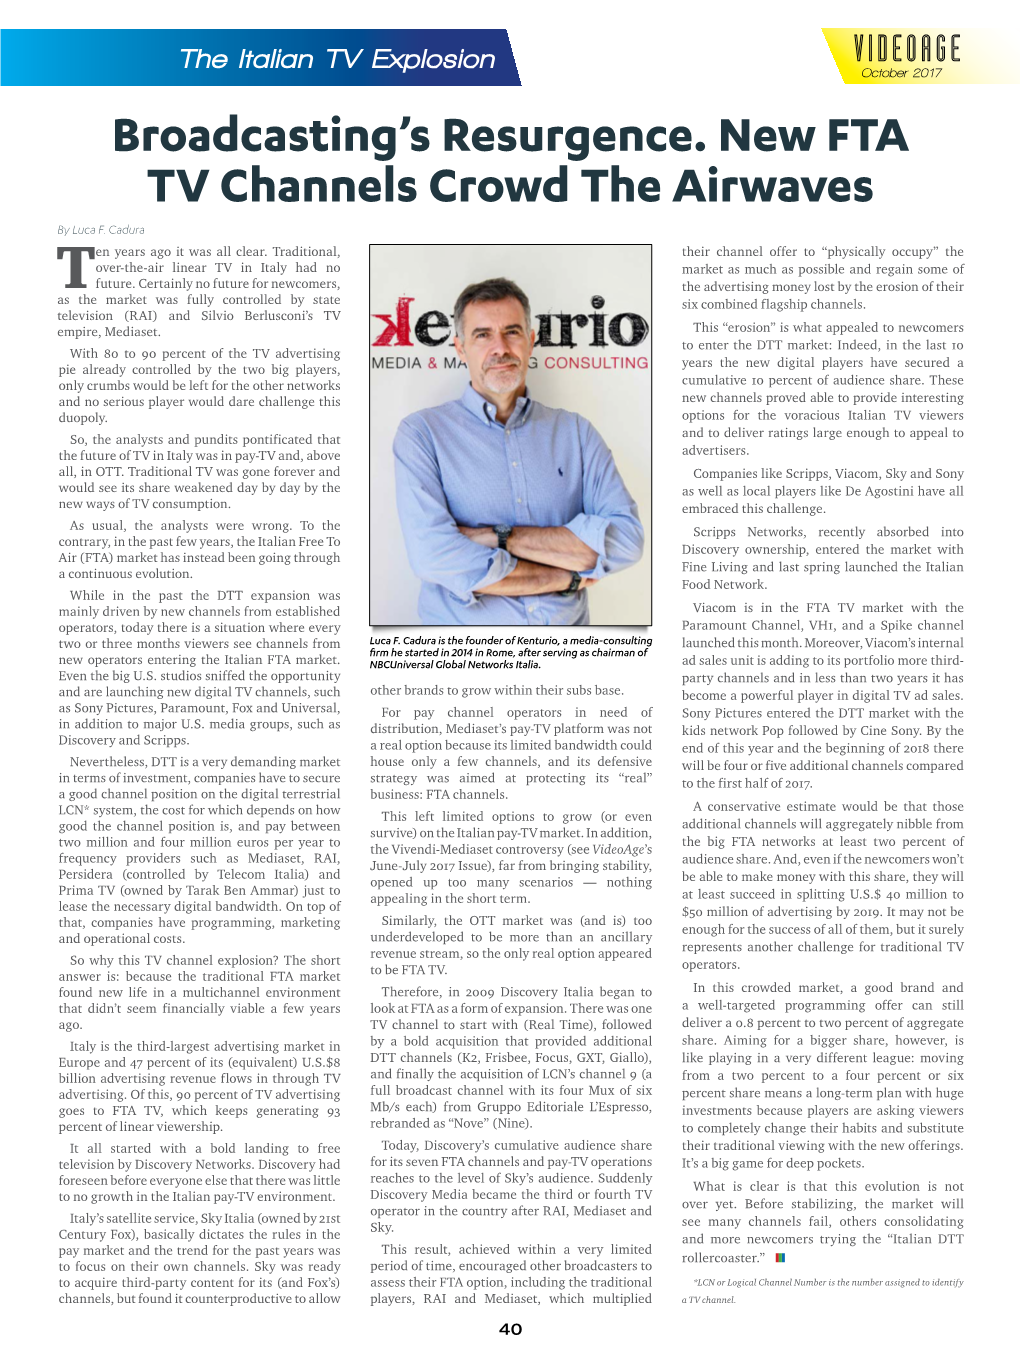 Broadcasting's Resurgence. New FTA TV Channels Crowd the Airwaves